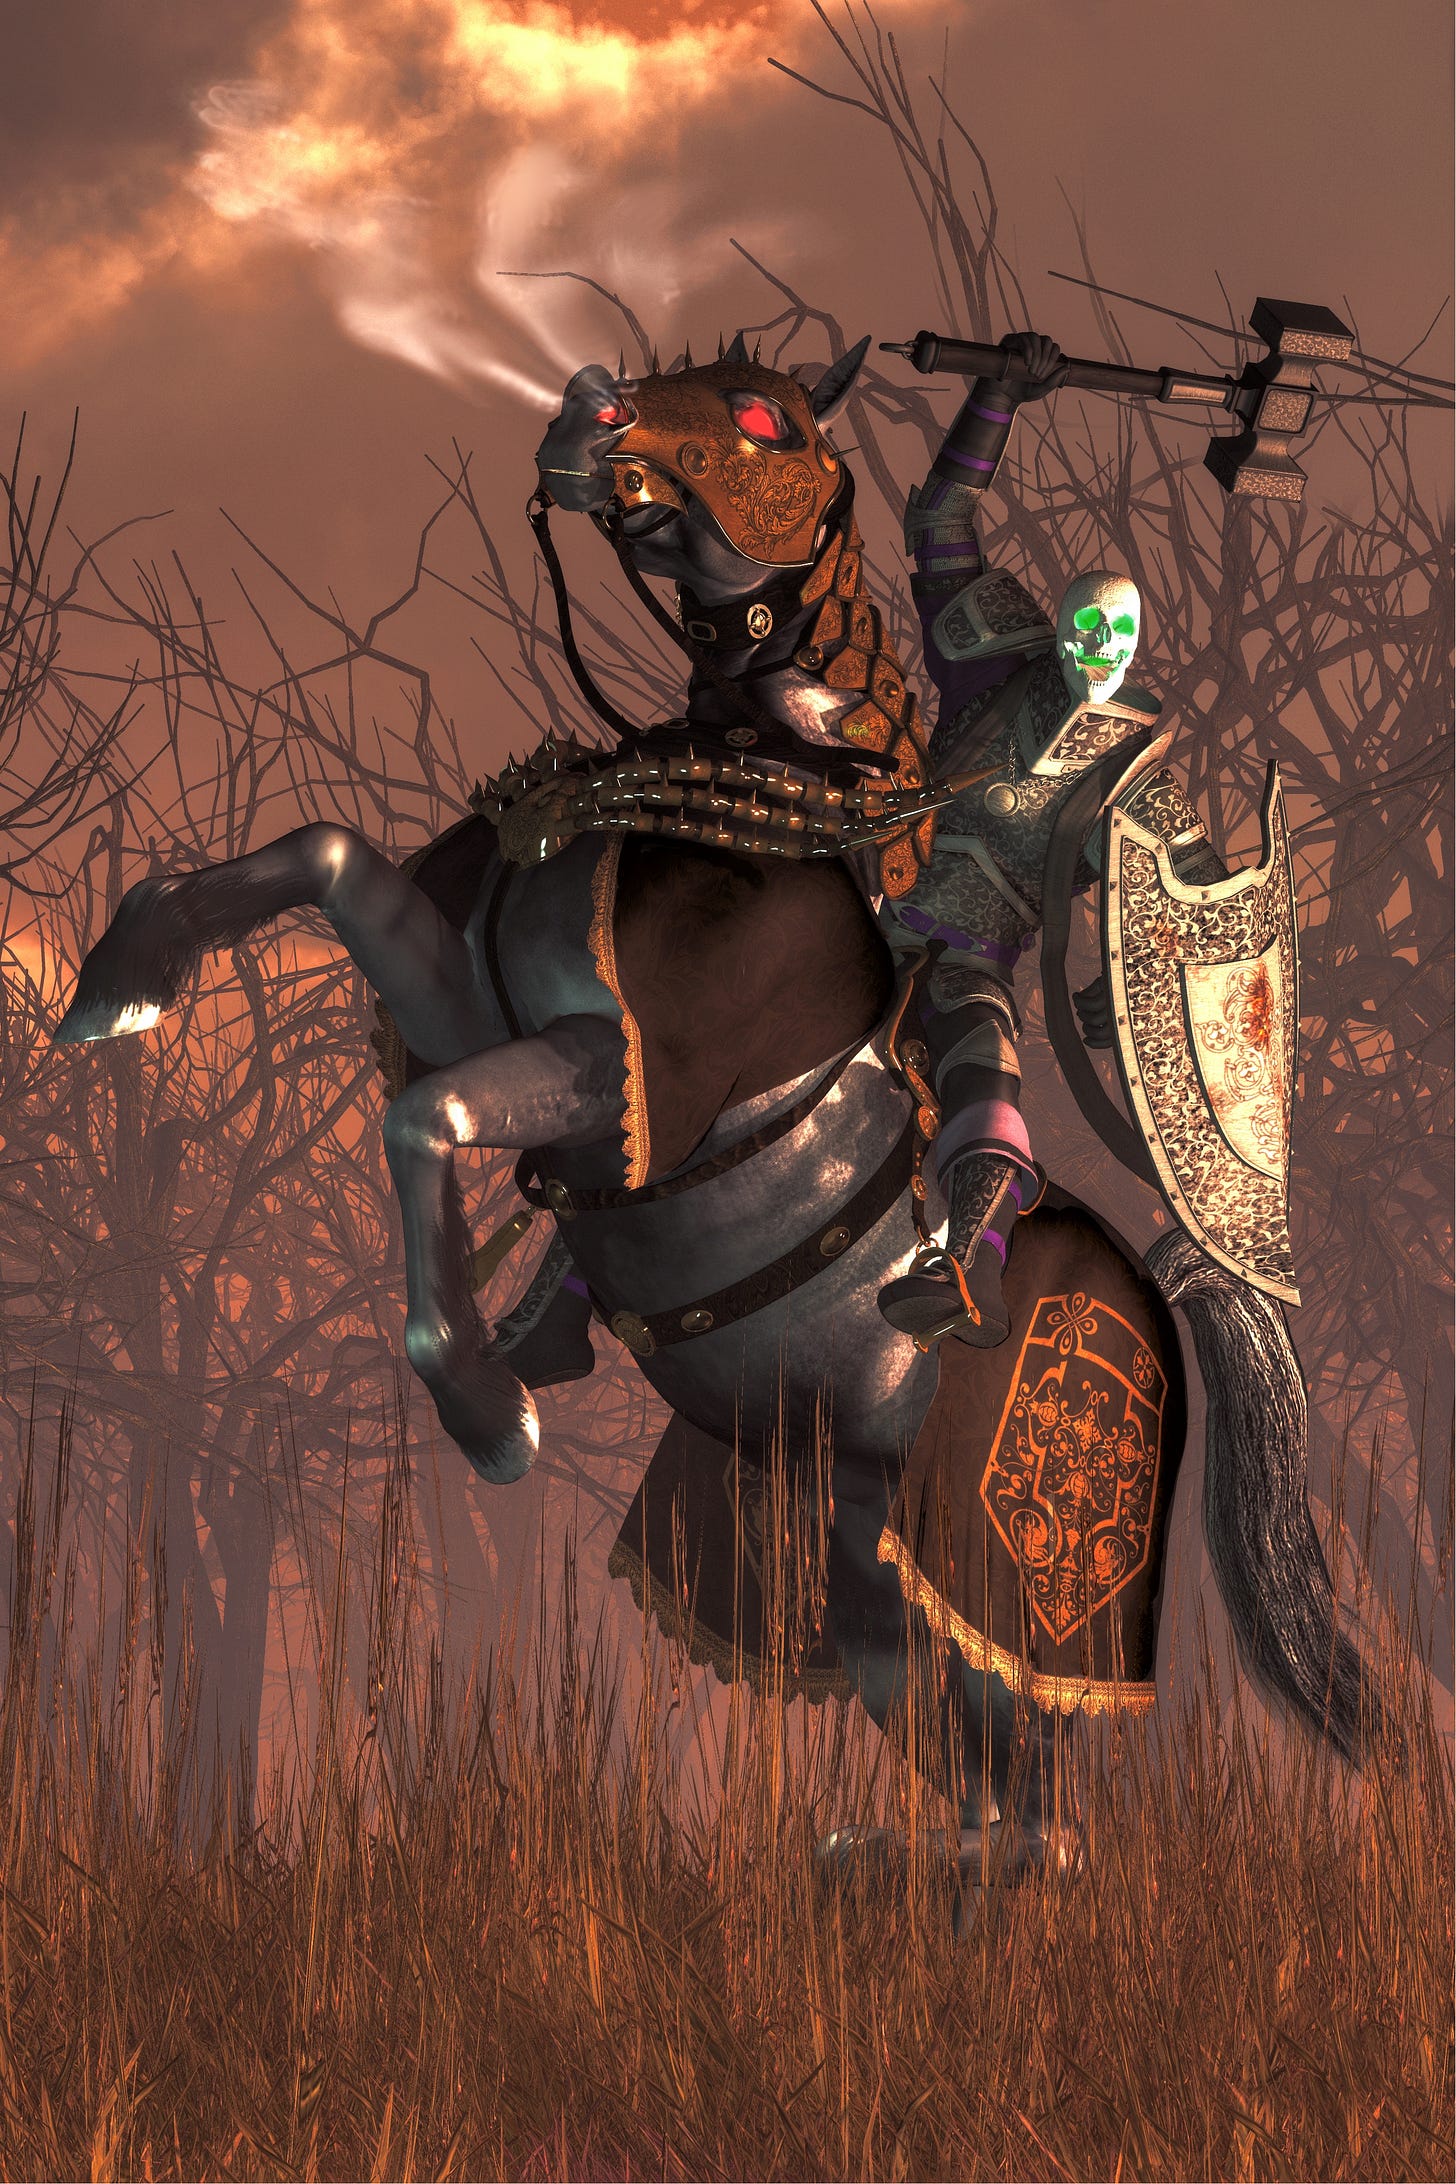 Warhammer wielding skeleton on a red eyed , armored brown horse